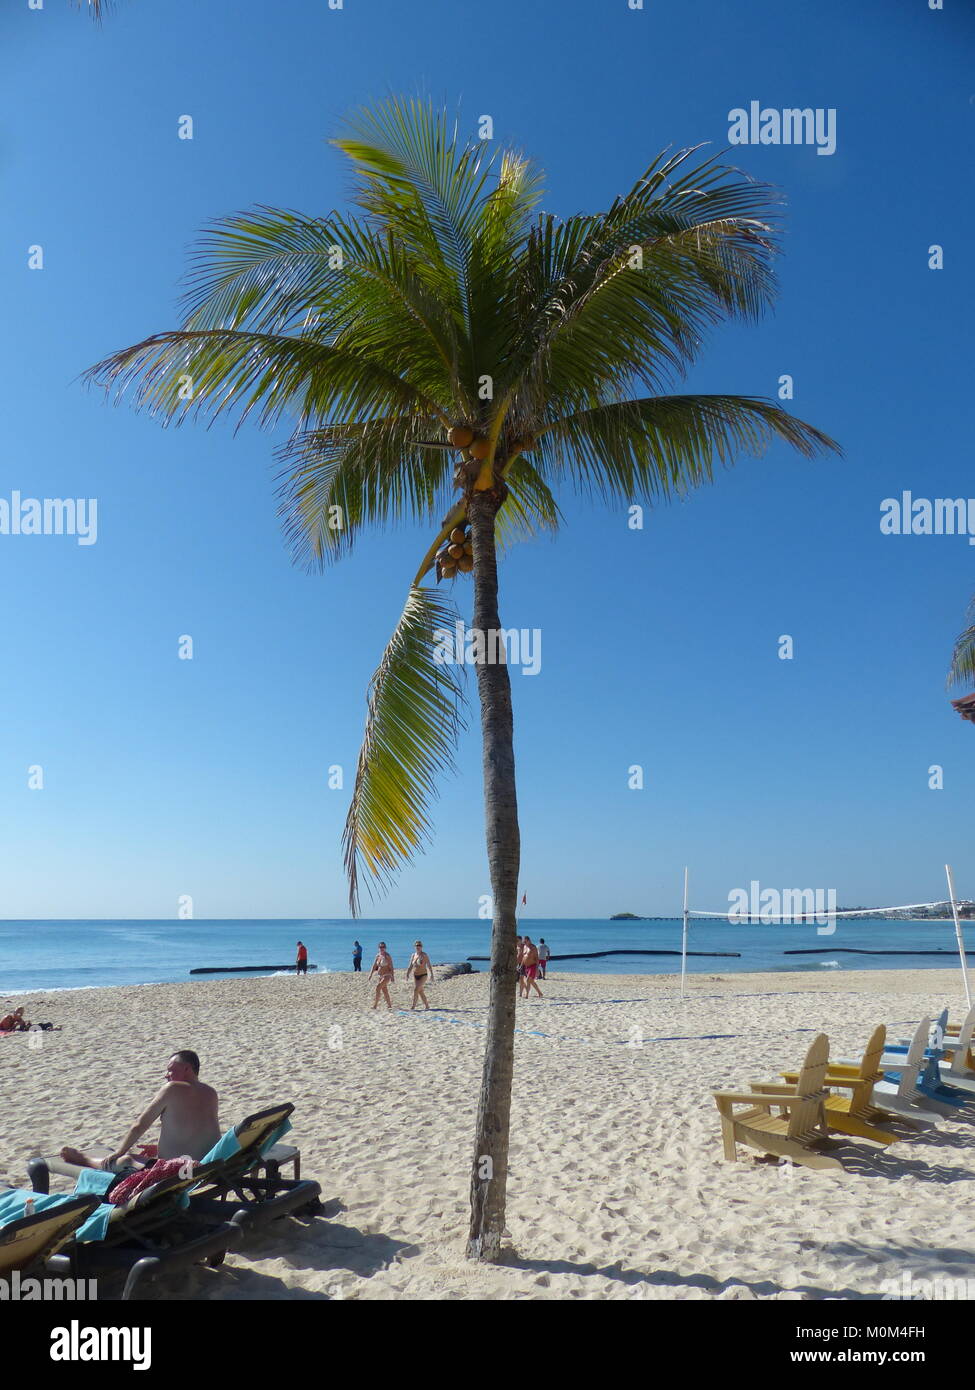 Man sitting under coconut palm (Cocos nucifera) with caribbean Sea. More people get killed every year by falling coconuts than by shark attacks Stock Photo